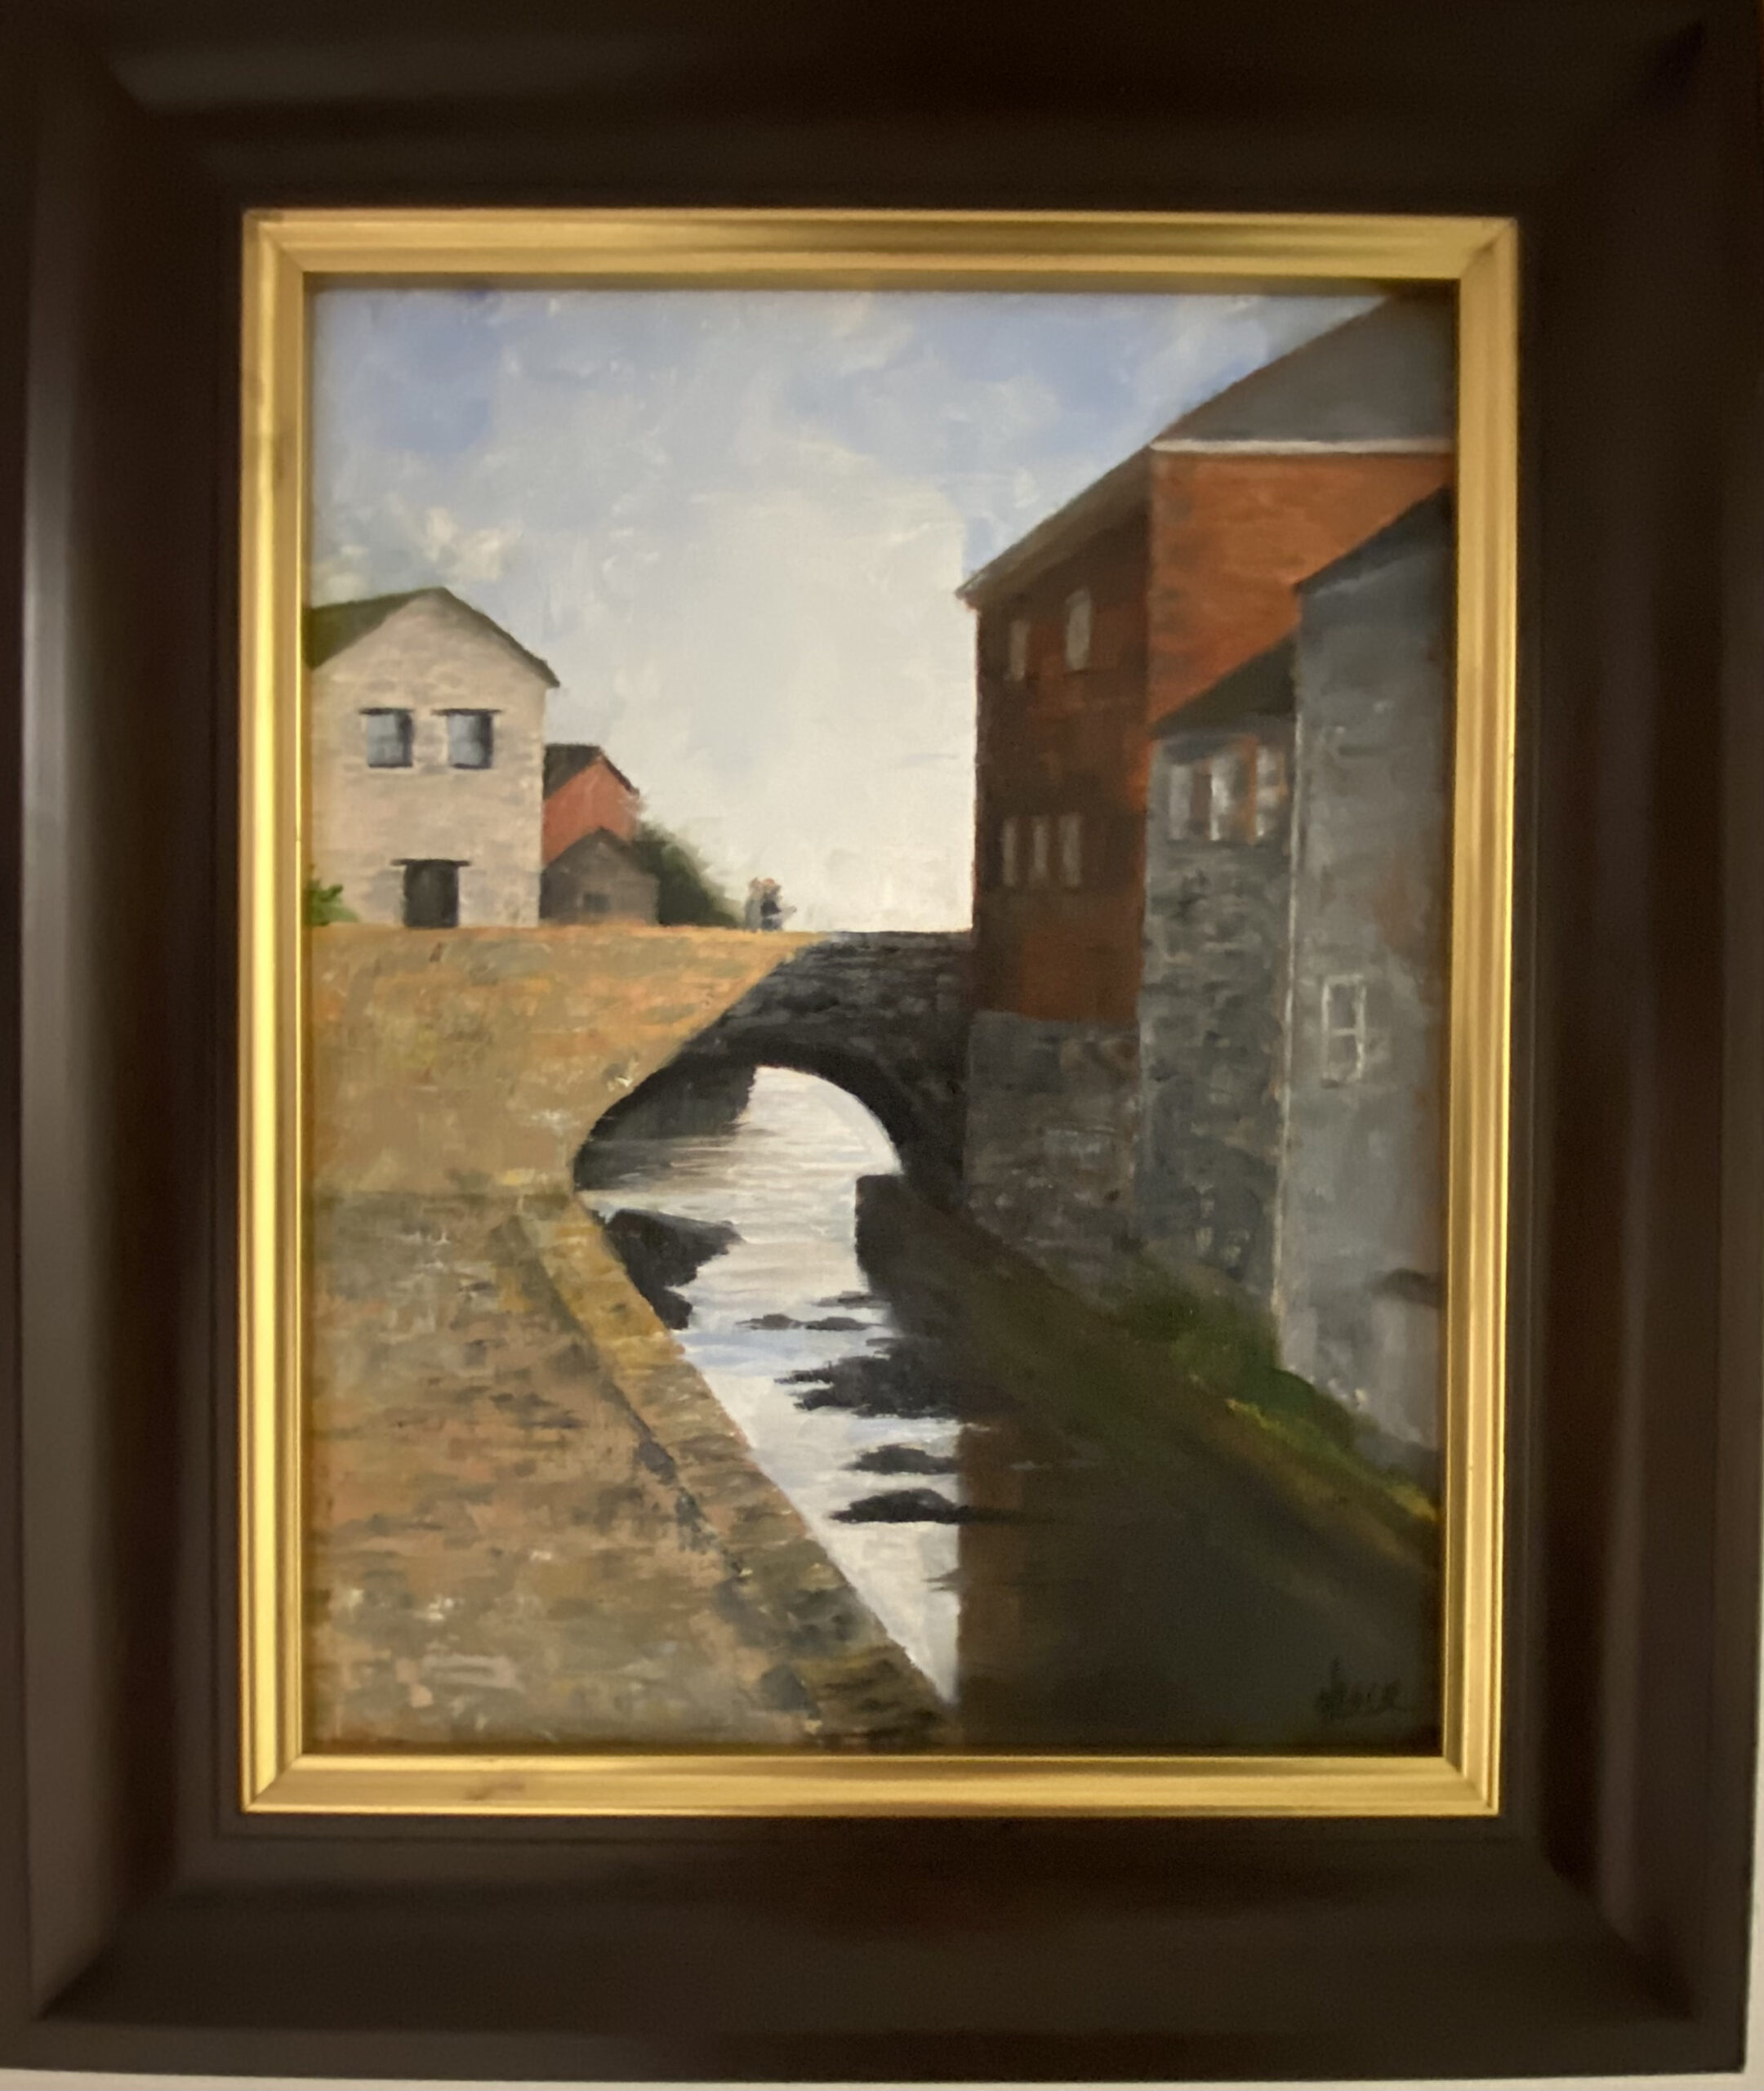 Early morning light bathes a stone bridge in a quaint town in this Henry Leck painting.